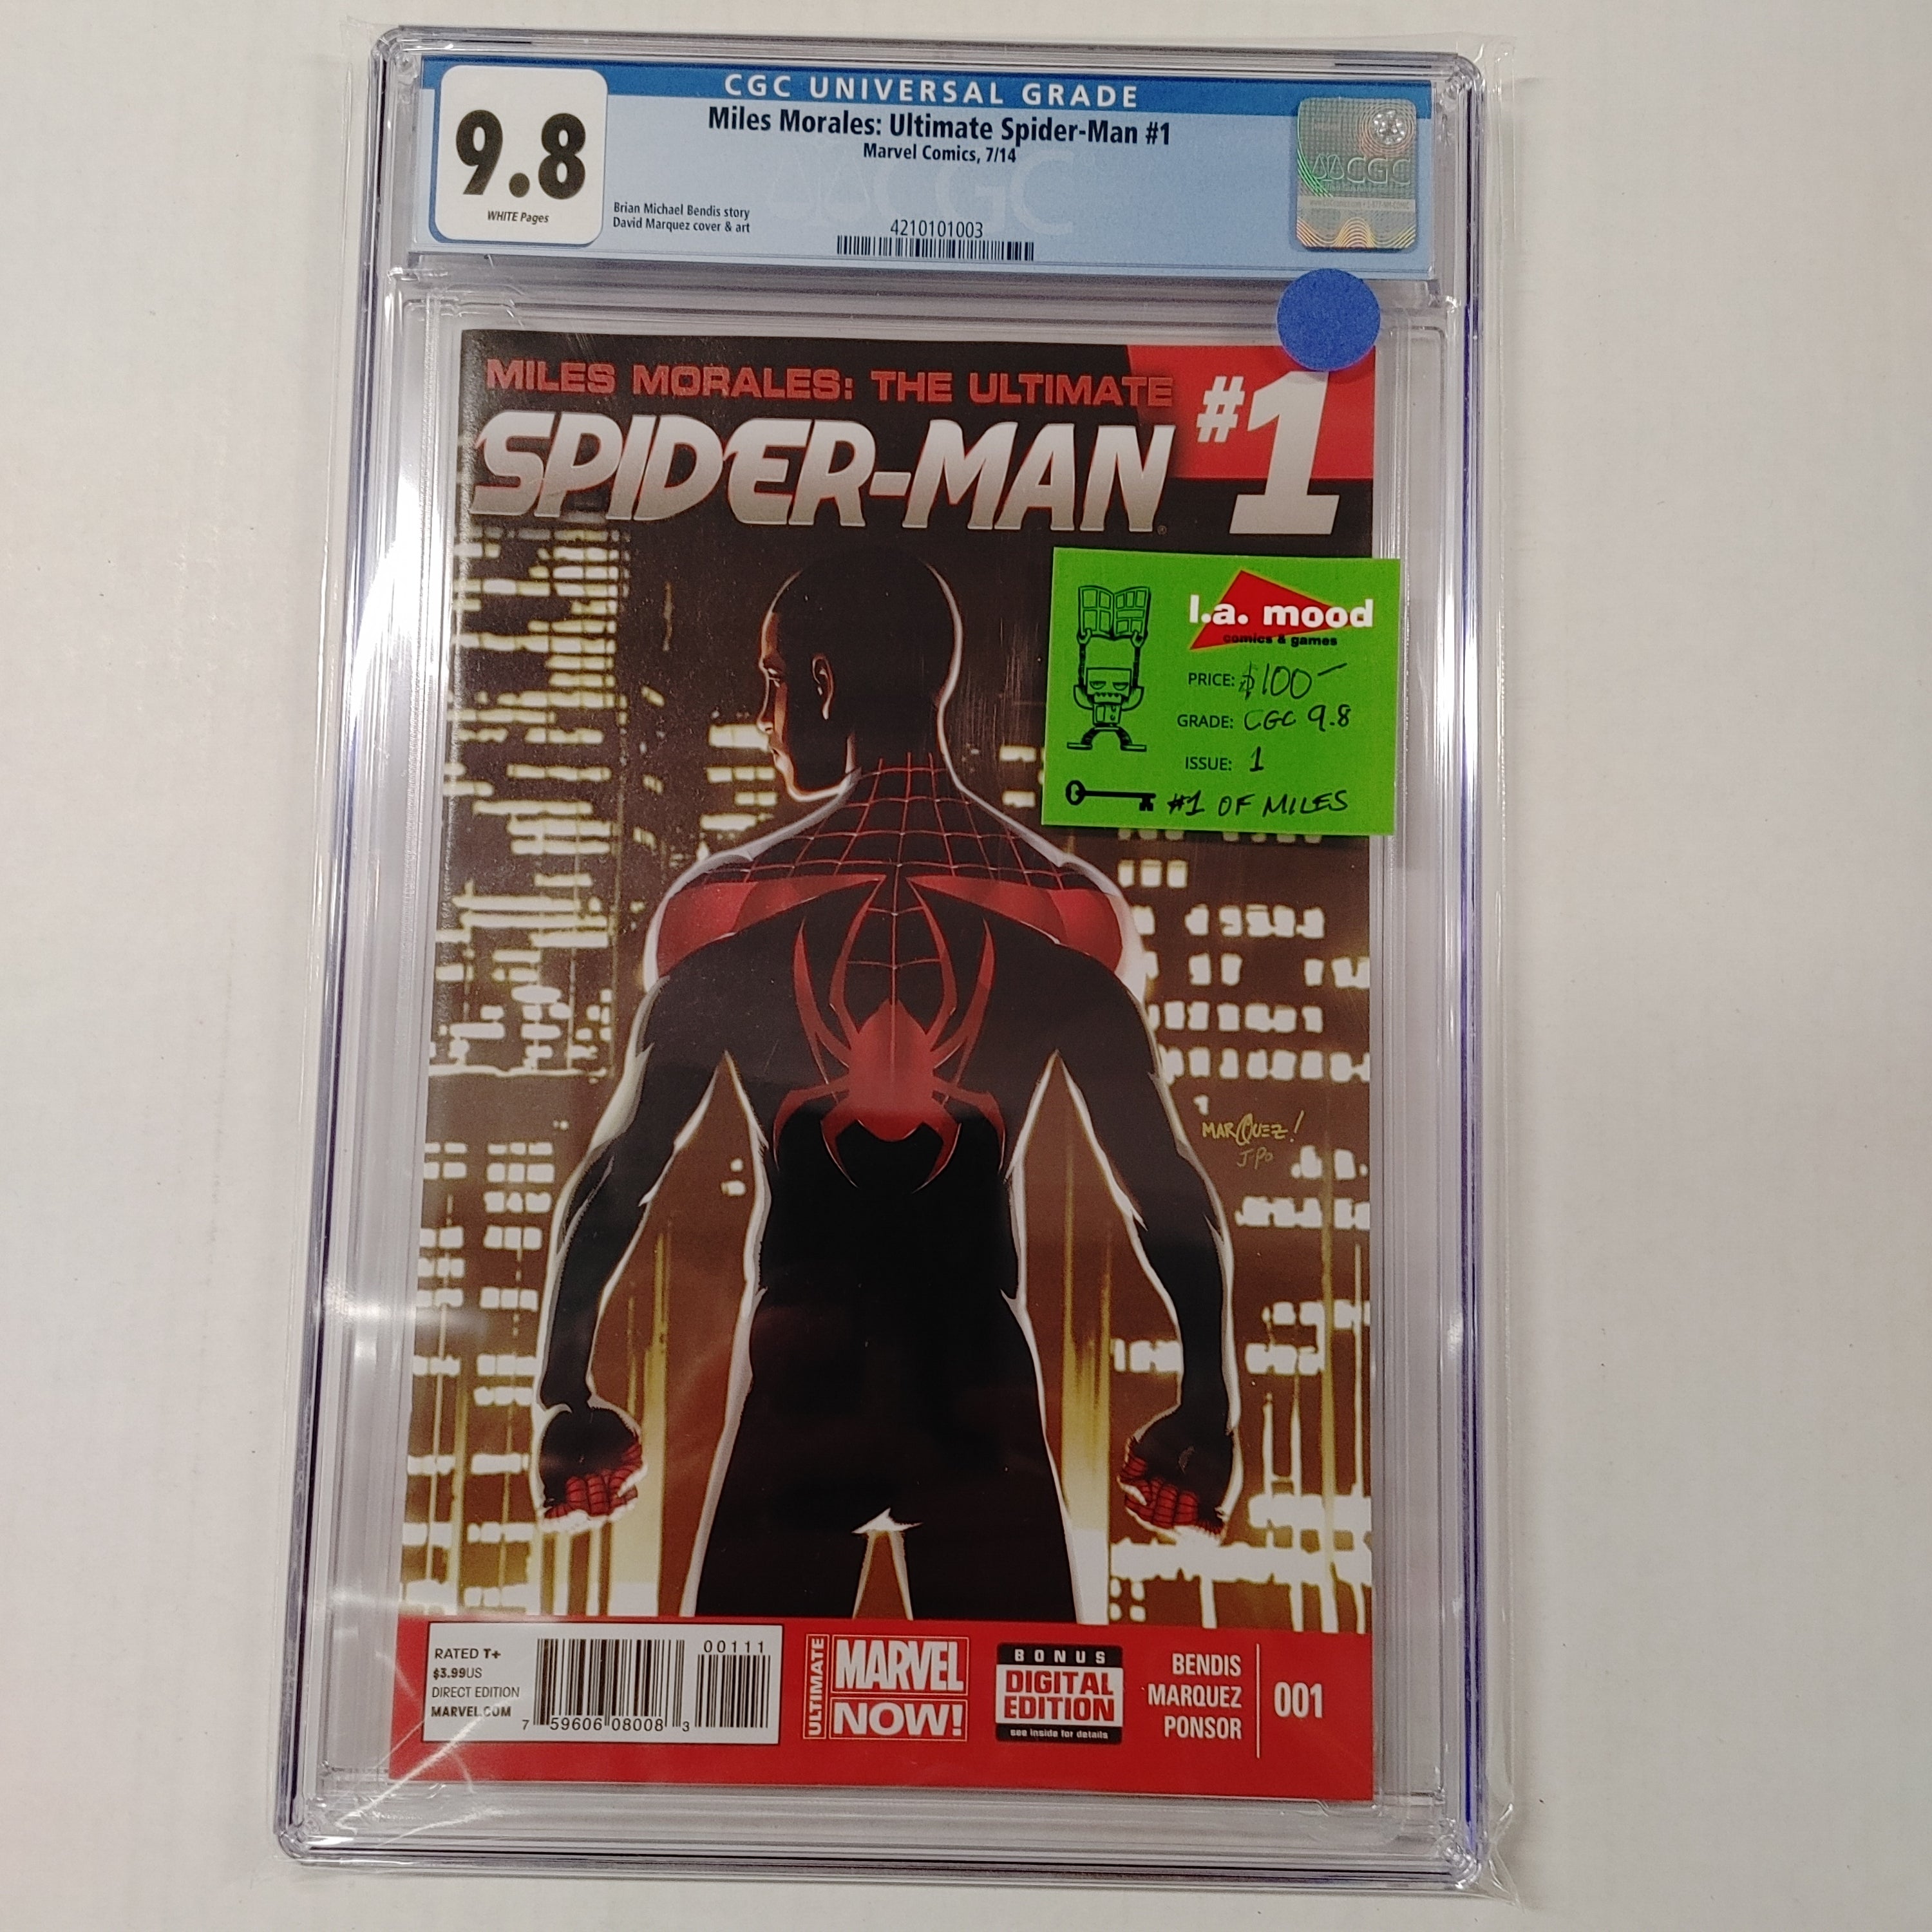 MILES MORALES: THE ULTIMATE SPIDER-MAN #1 CGC 9.8 | L.A. Mood Comics and Games